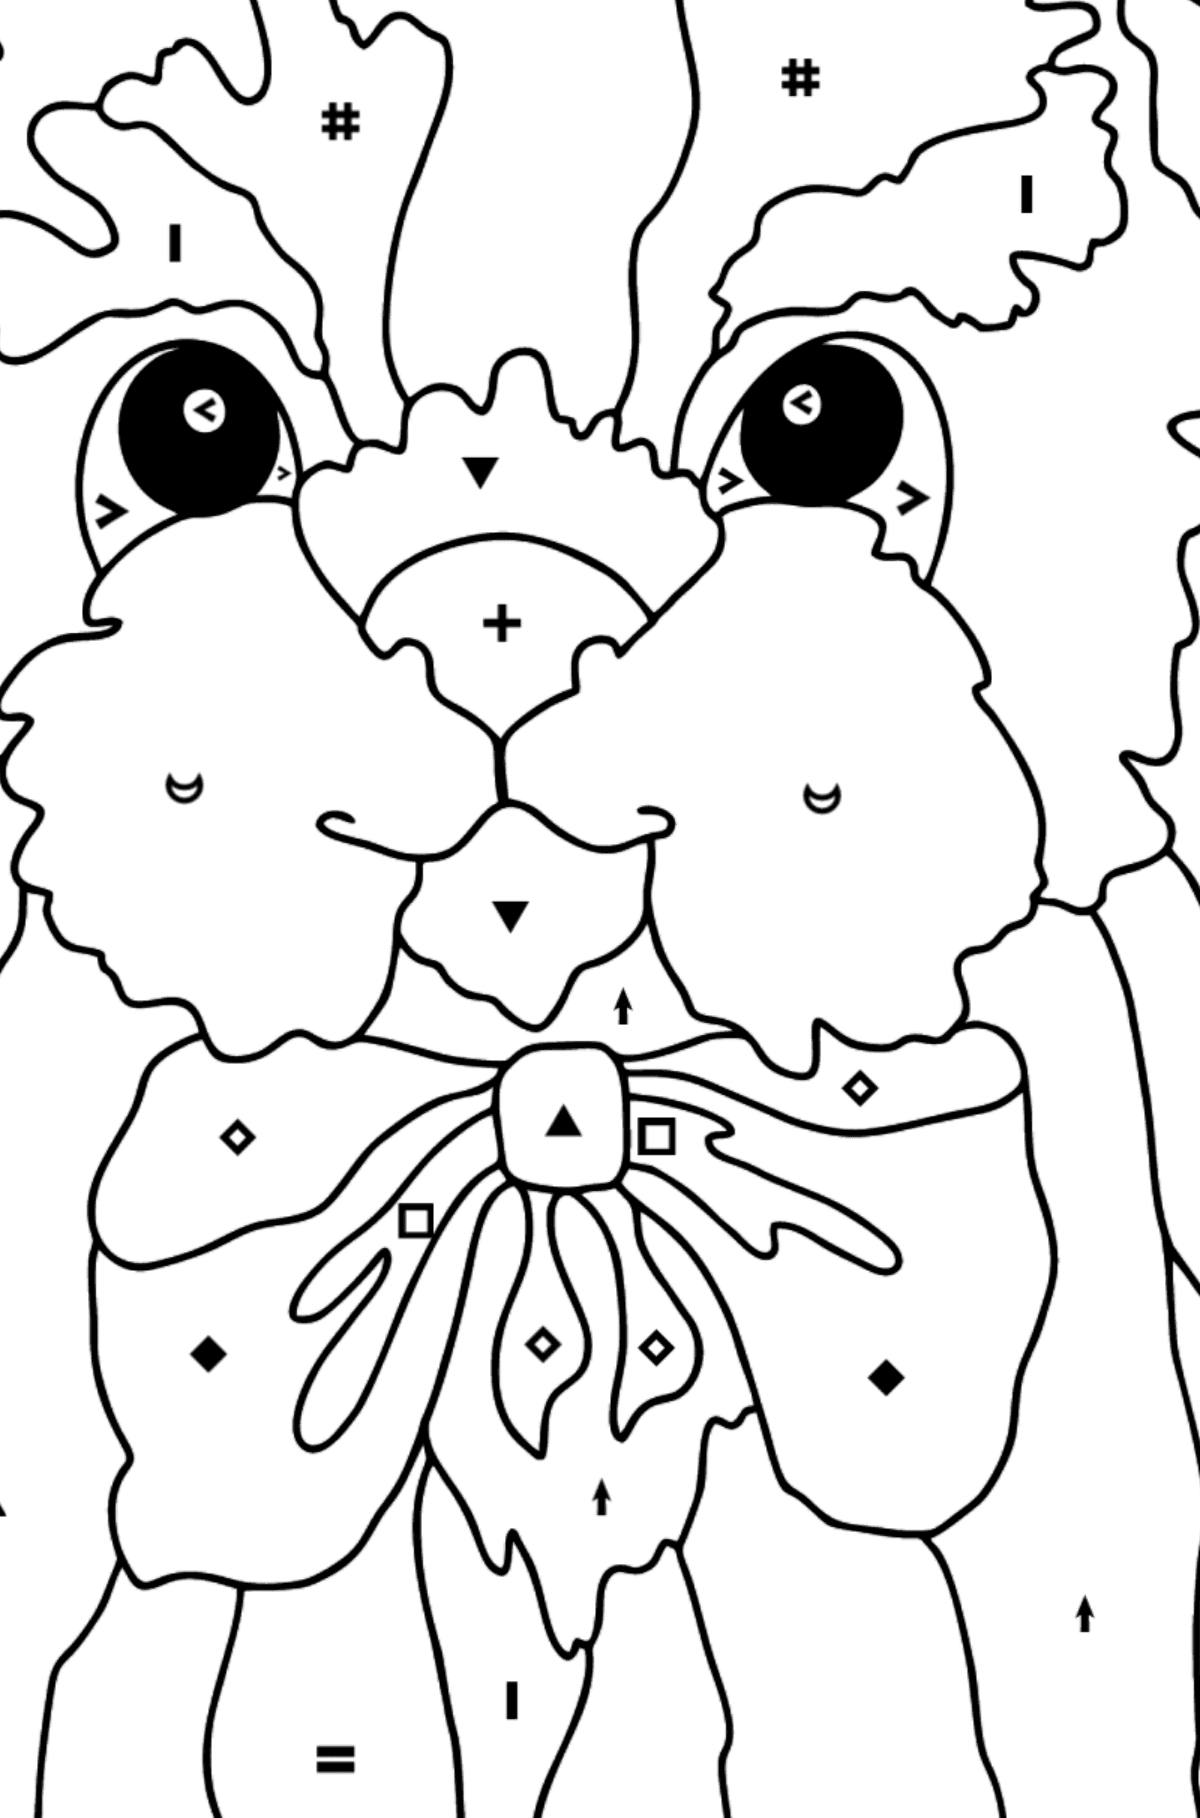 Coloring Page - A Dog with a Bow - Coloring by Symbols for Kids